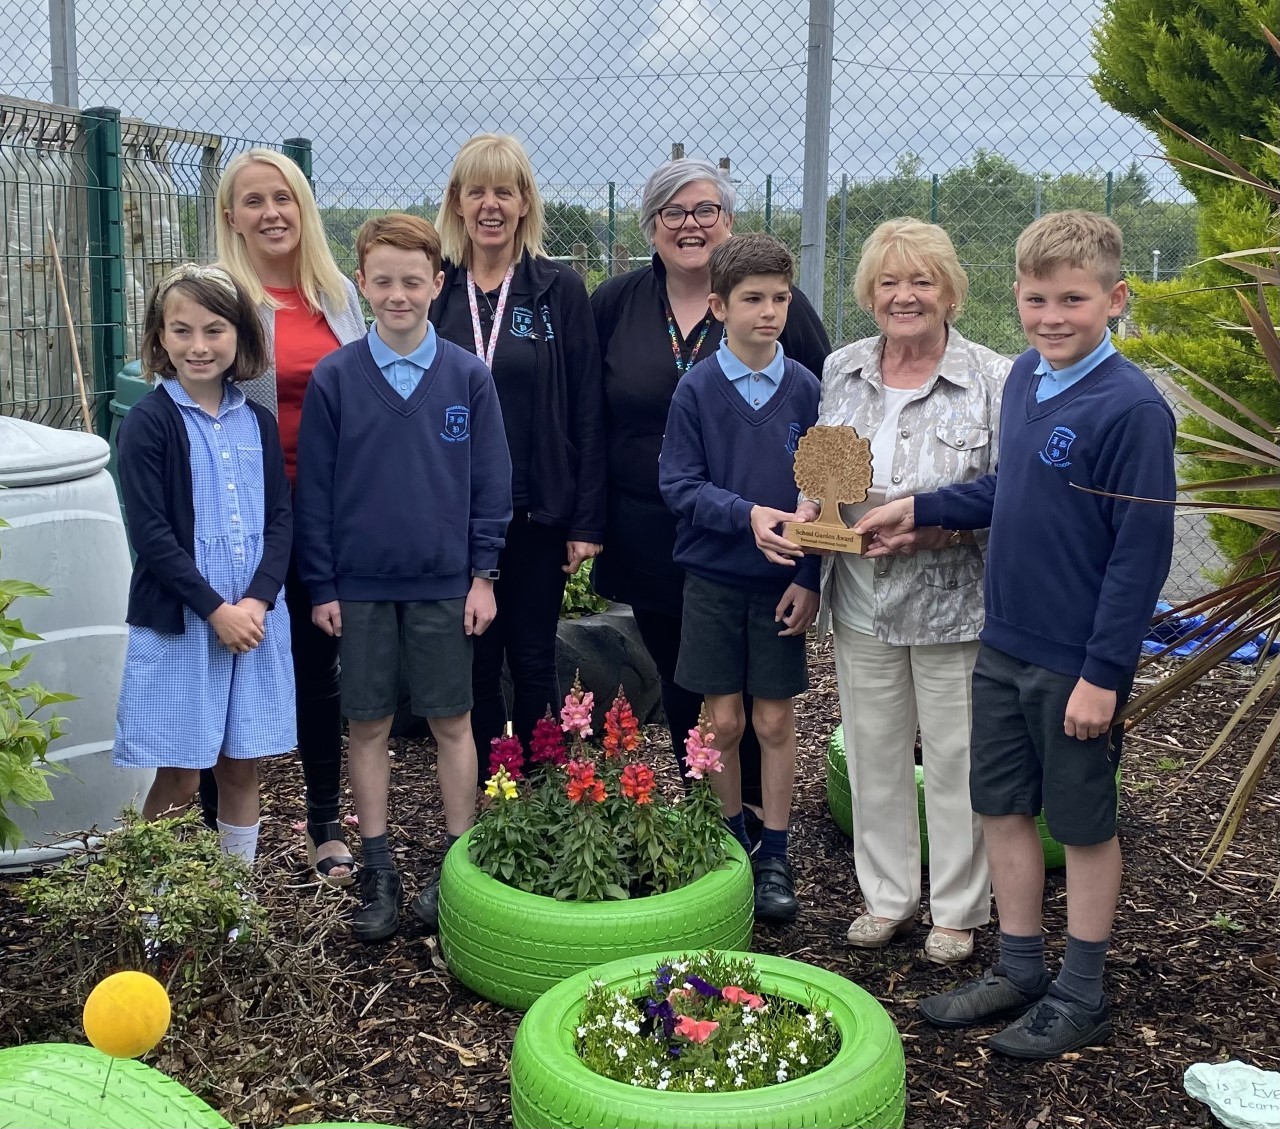 Irvinestown Primary School p6 Eco team receive Garden of the Year Award from Fermanagh Gardening Society President Mrs Evelyn Cruwys. Pictured left to right: Isobel Guida, Mrs Edel Bradshaw (teacher)Bailey Cobaine, Mrs Mary Griffin, Mrs Ethel Johnston,